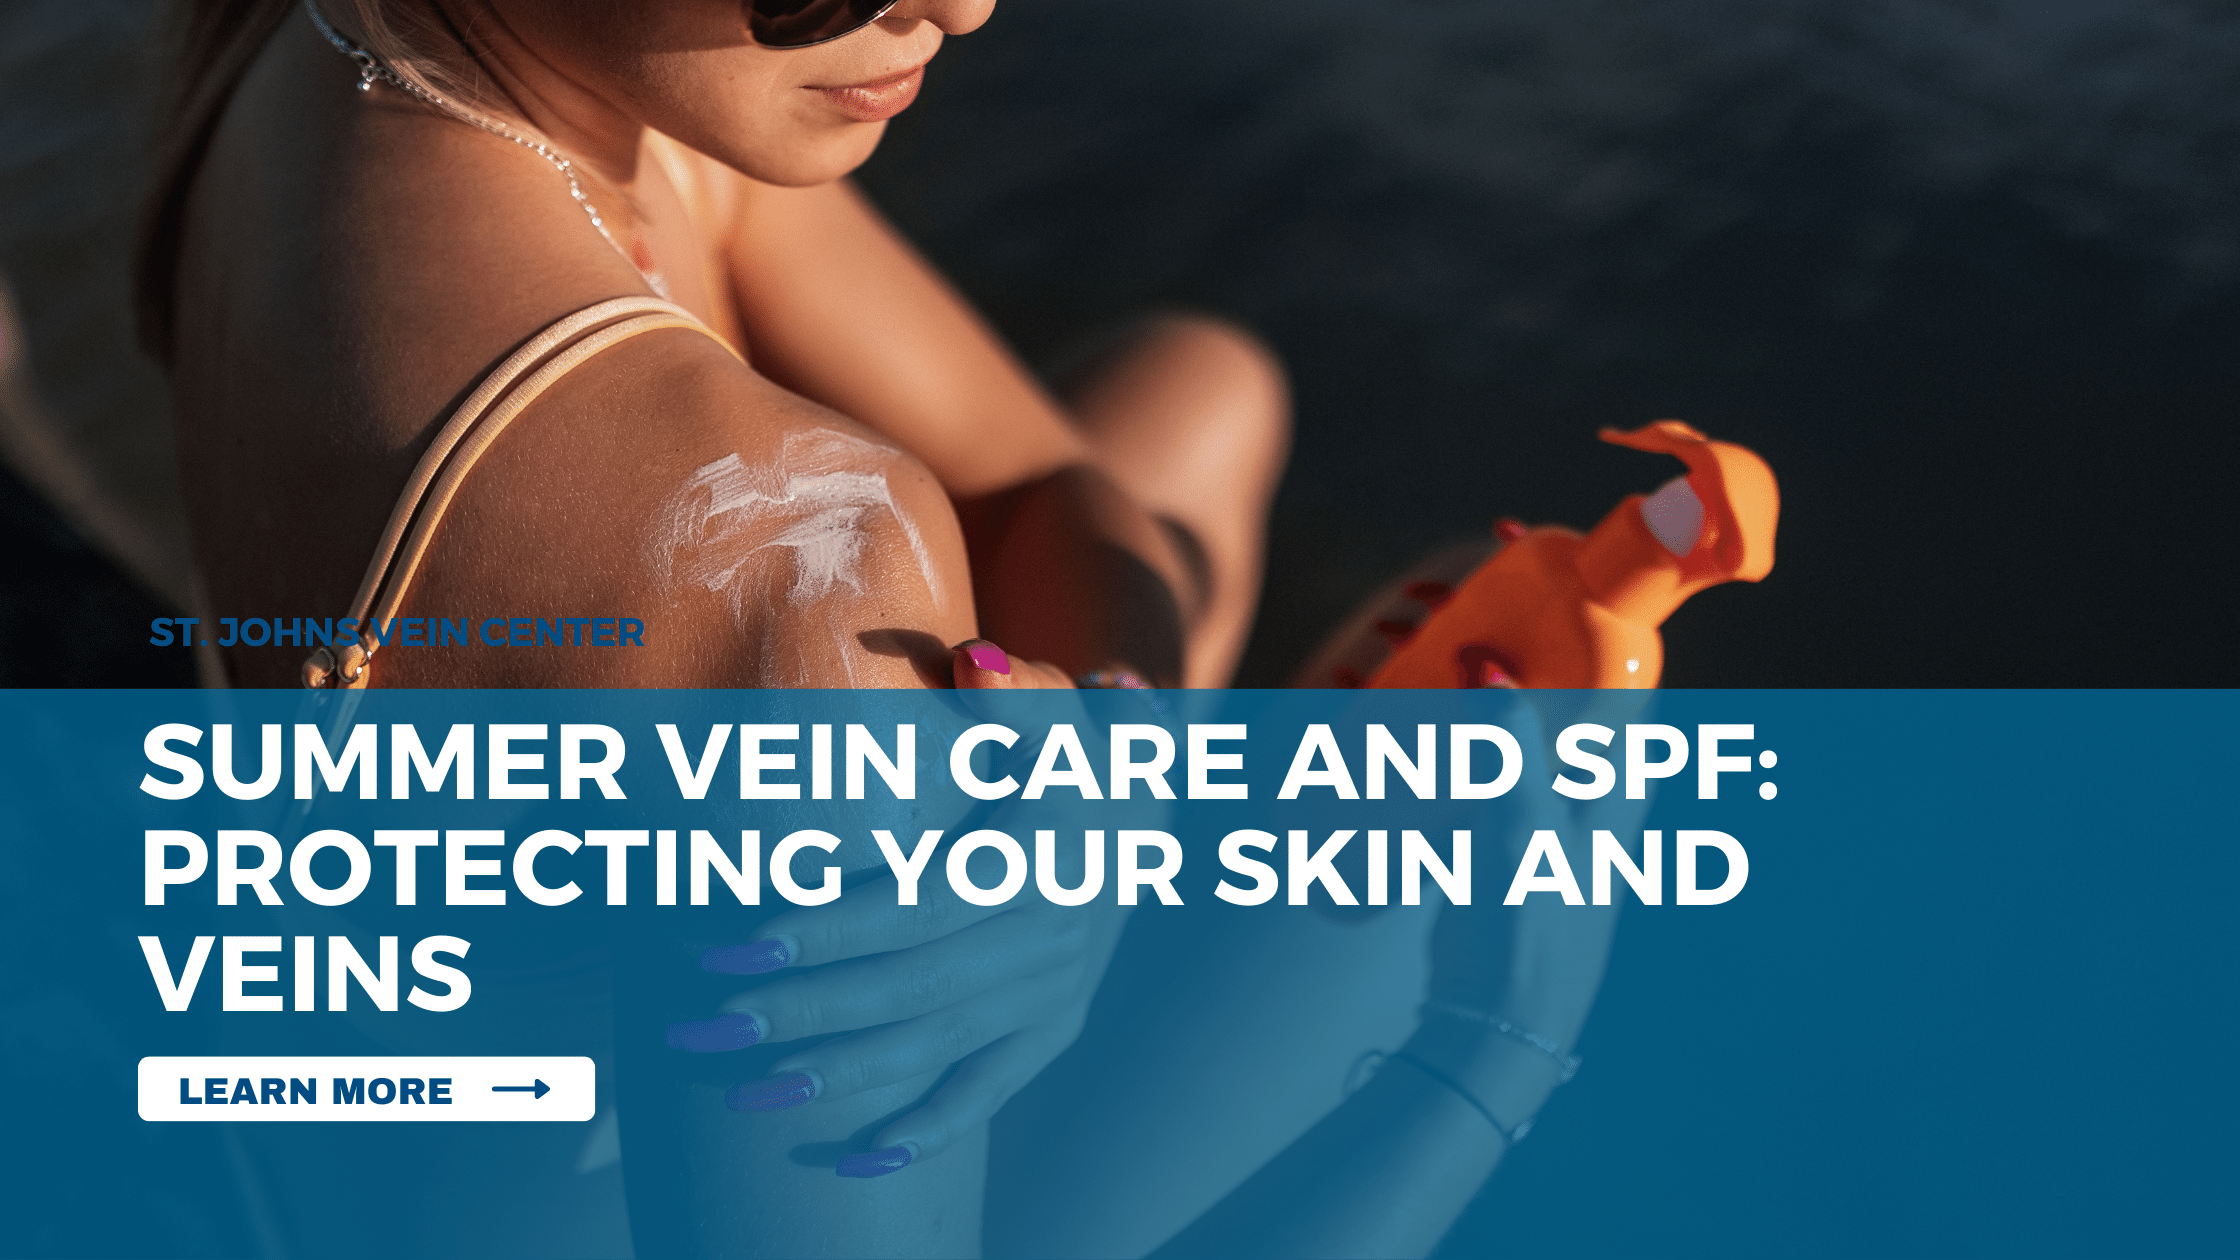 Summer Vein Care and SPF Protecting Your Skin and Veins